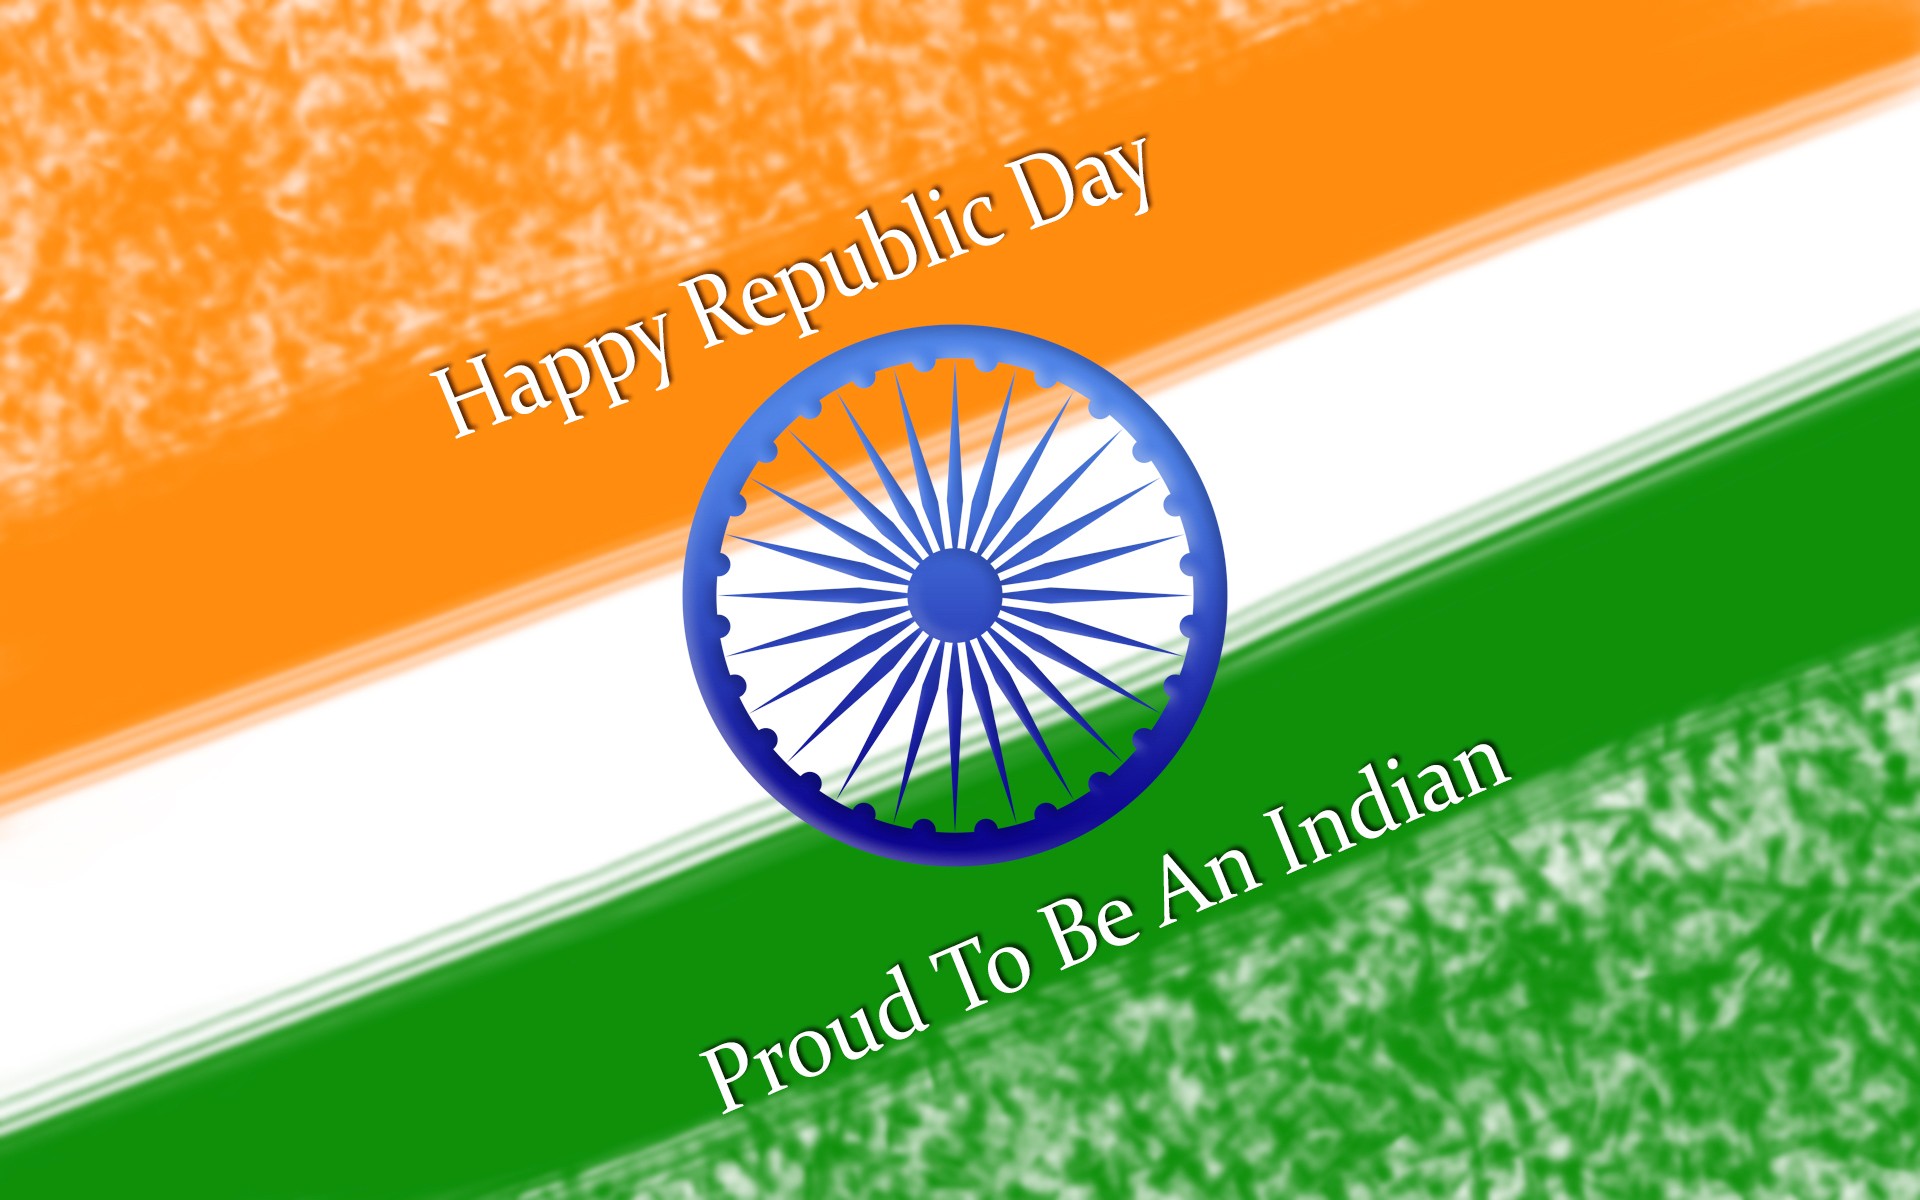 Republic Day Indian Flag Wallpapers Tiranga Image Pictures 26 January Bharat Flag